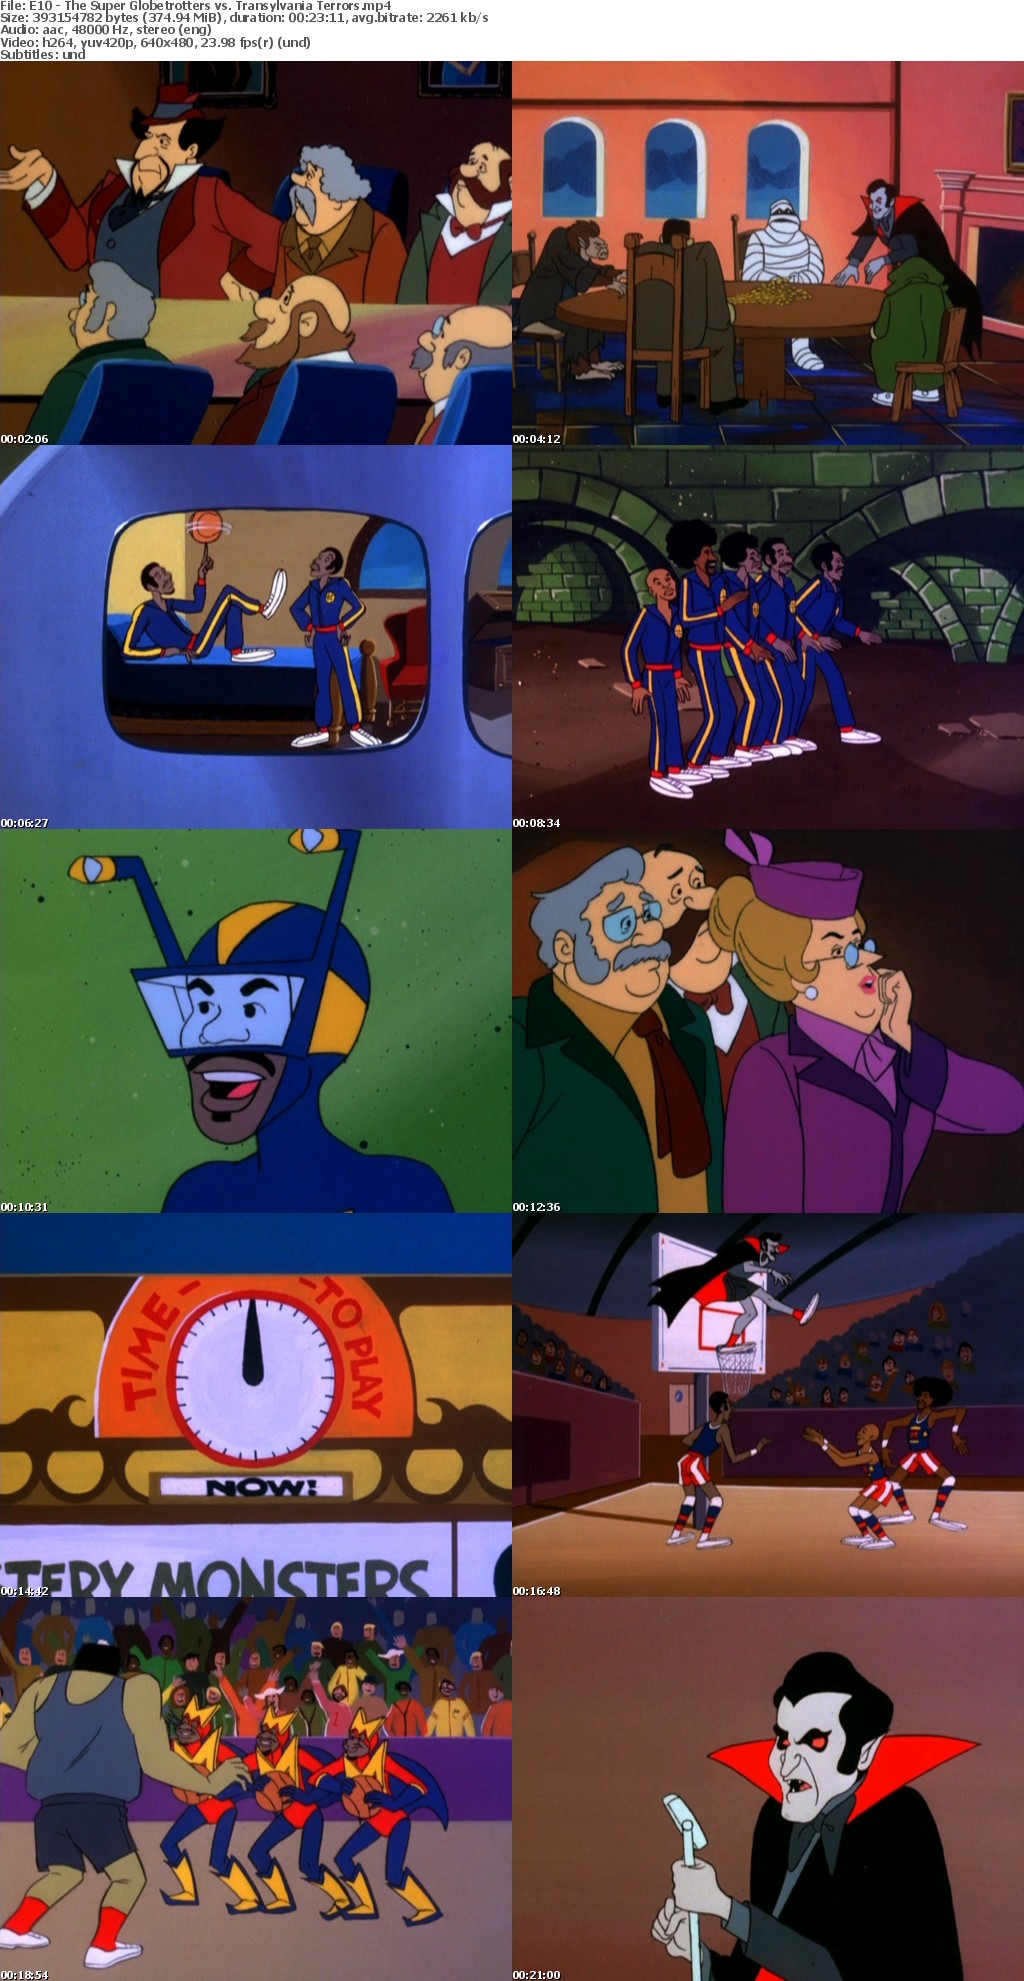 The Super Globe Trotters (Complete cartoon series in MP4 format)